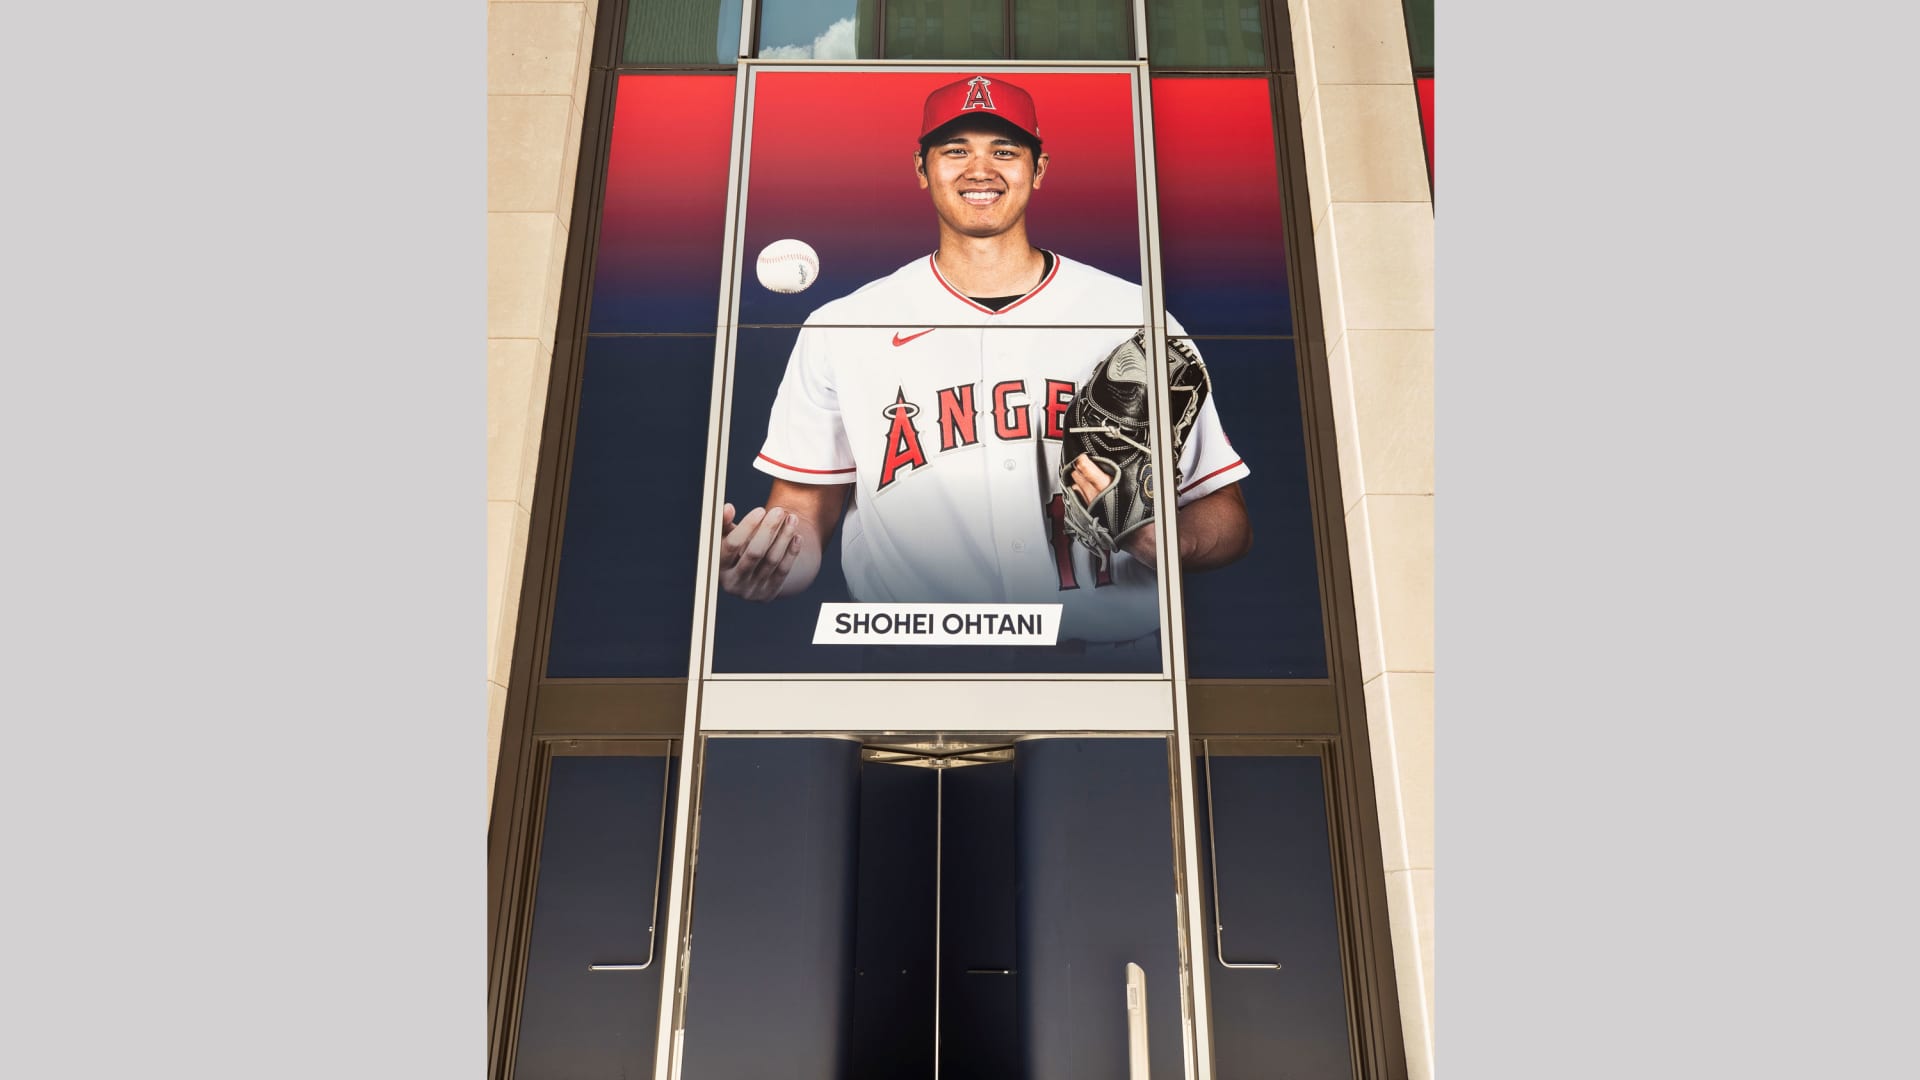 Signage featuring Shohei Ohtani is displayed outside of MLB headquarters in New York.